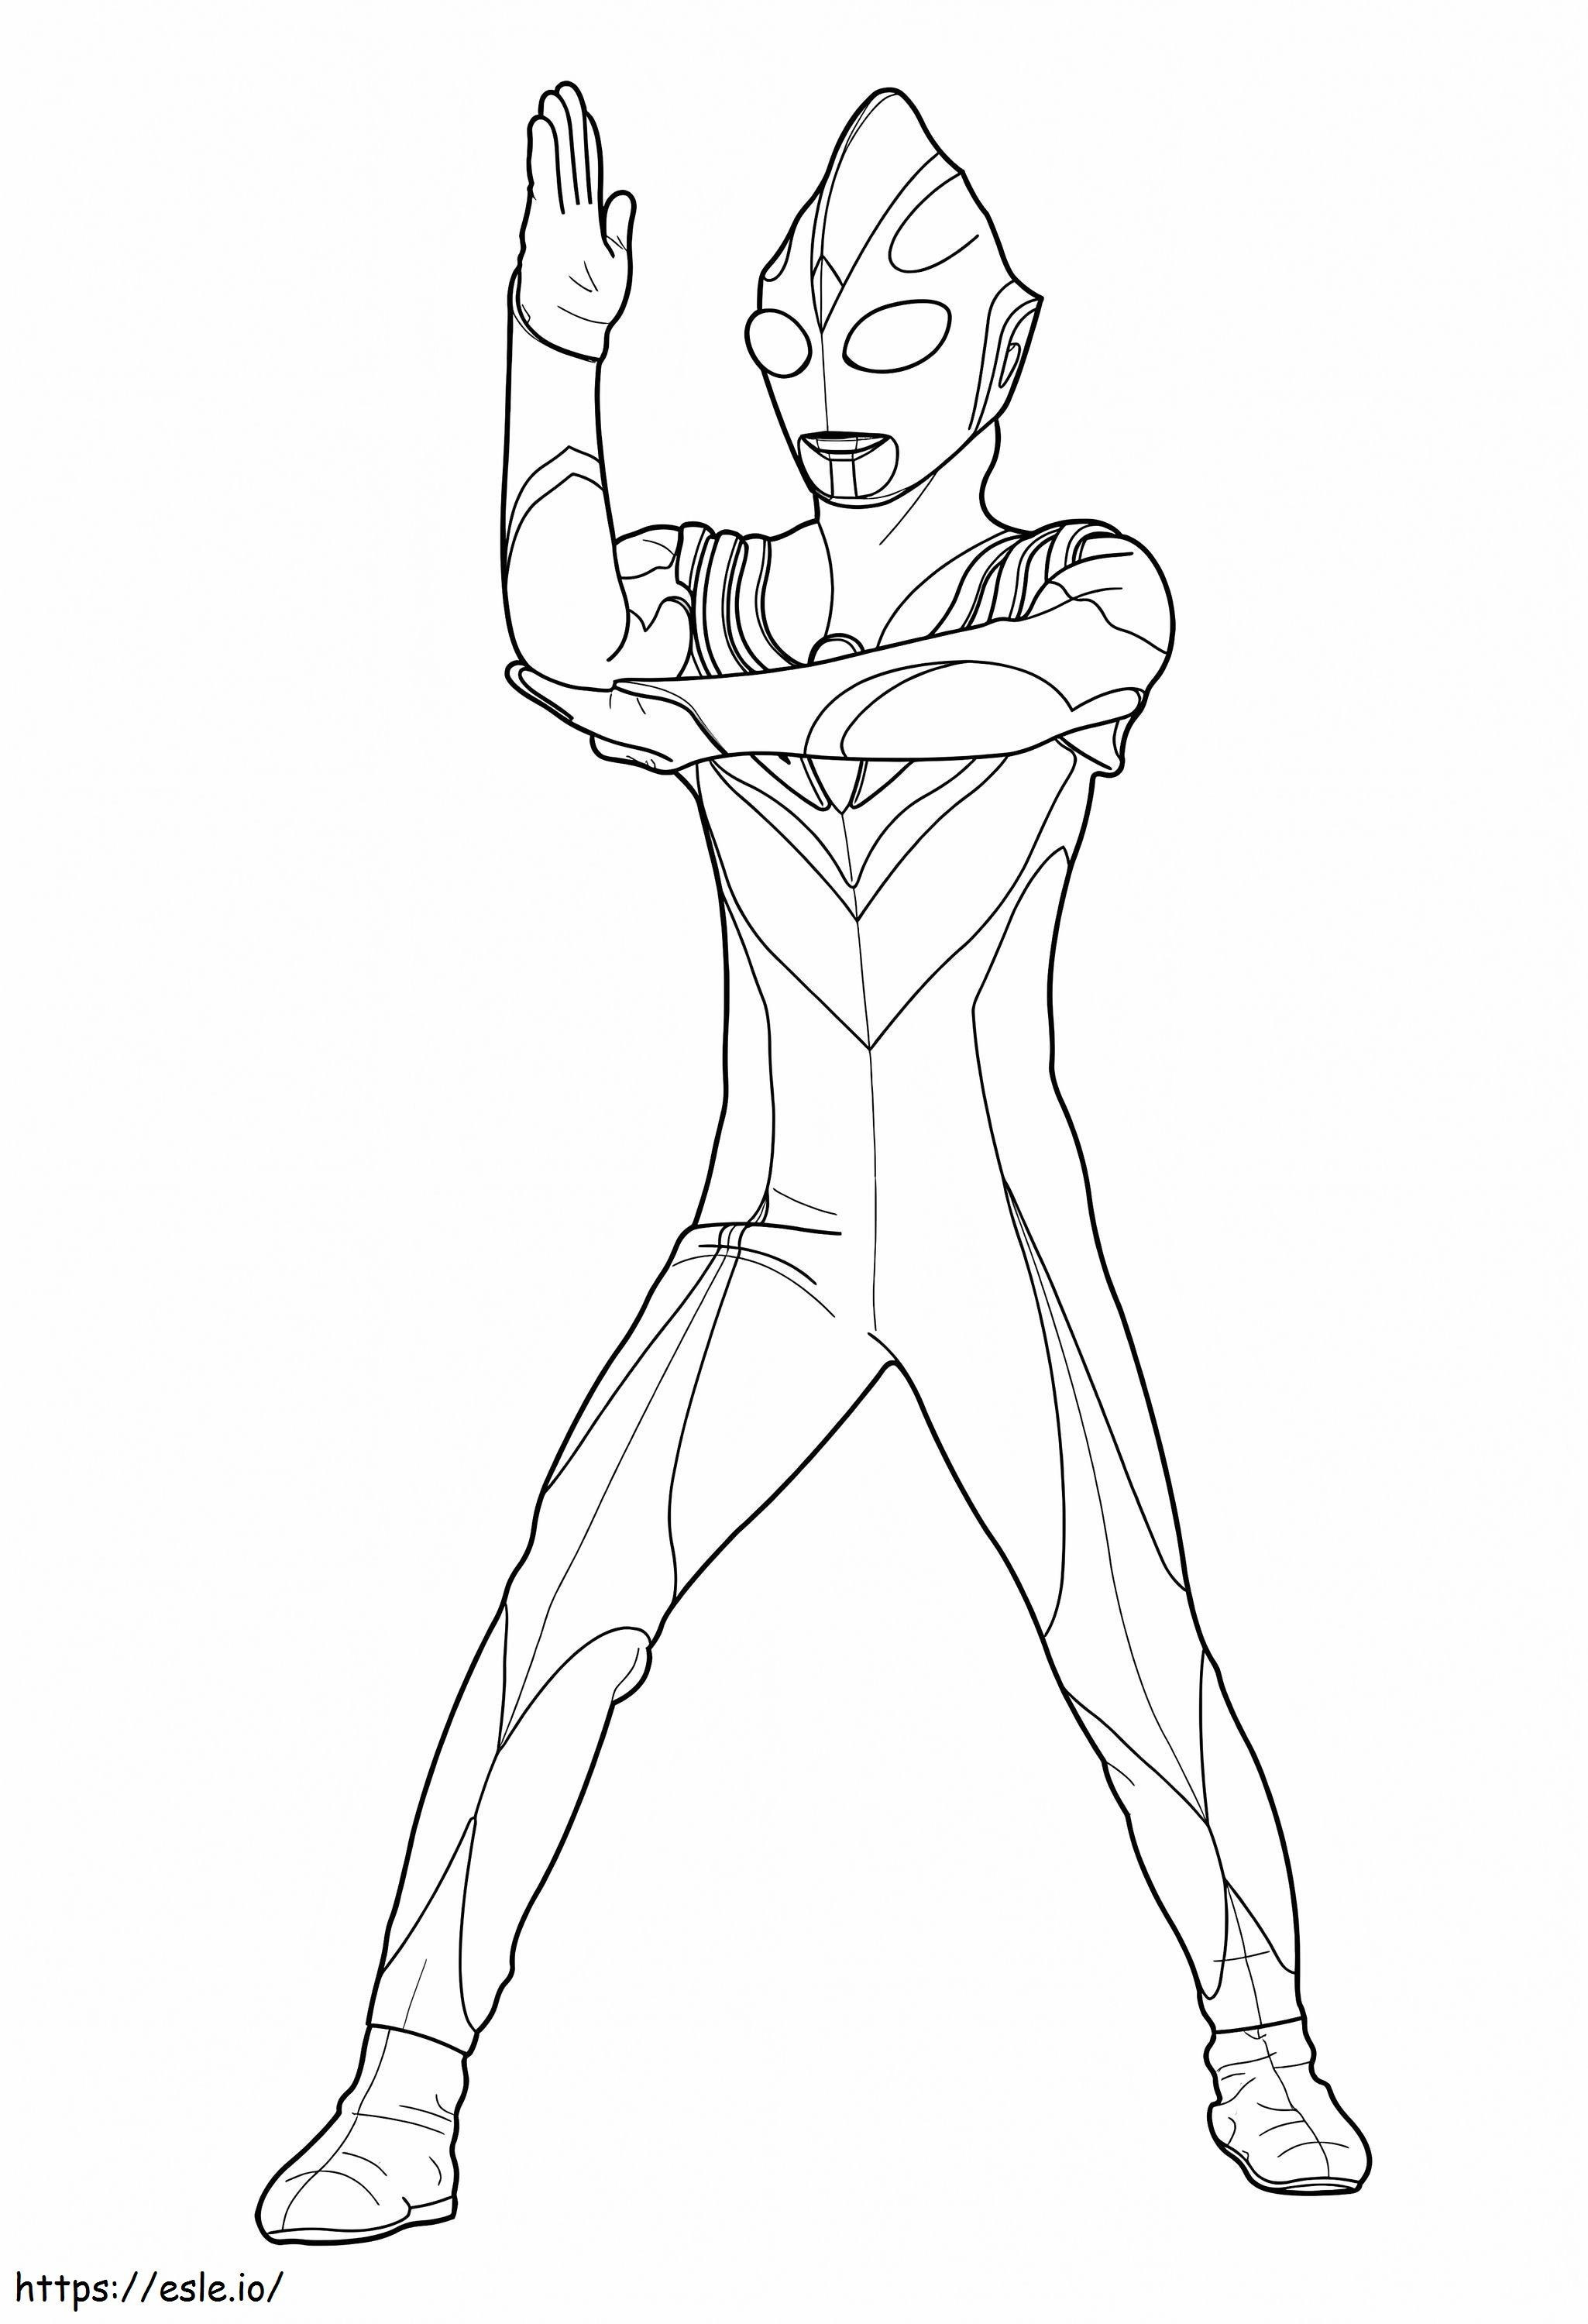 Ultraman Fighting 4 coloring page